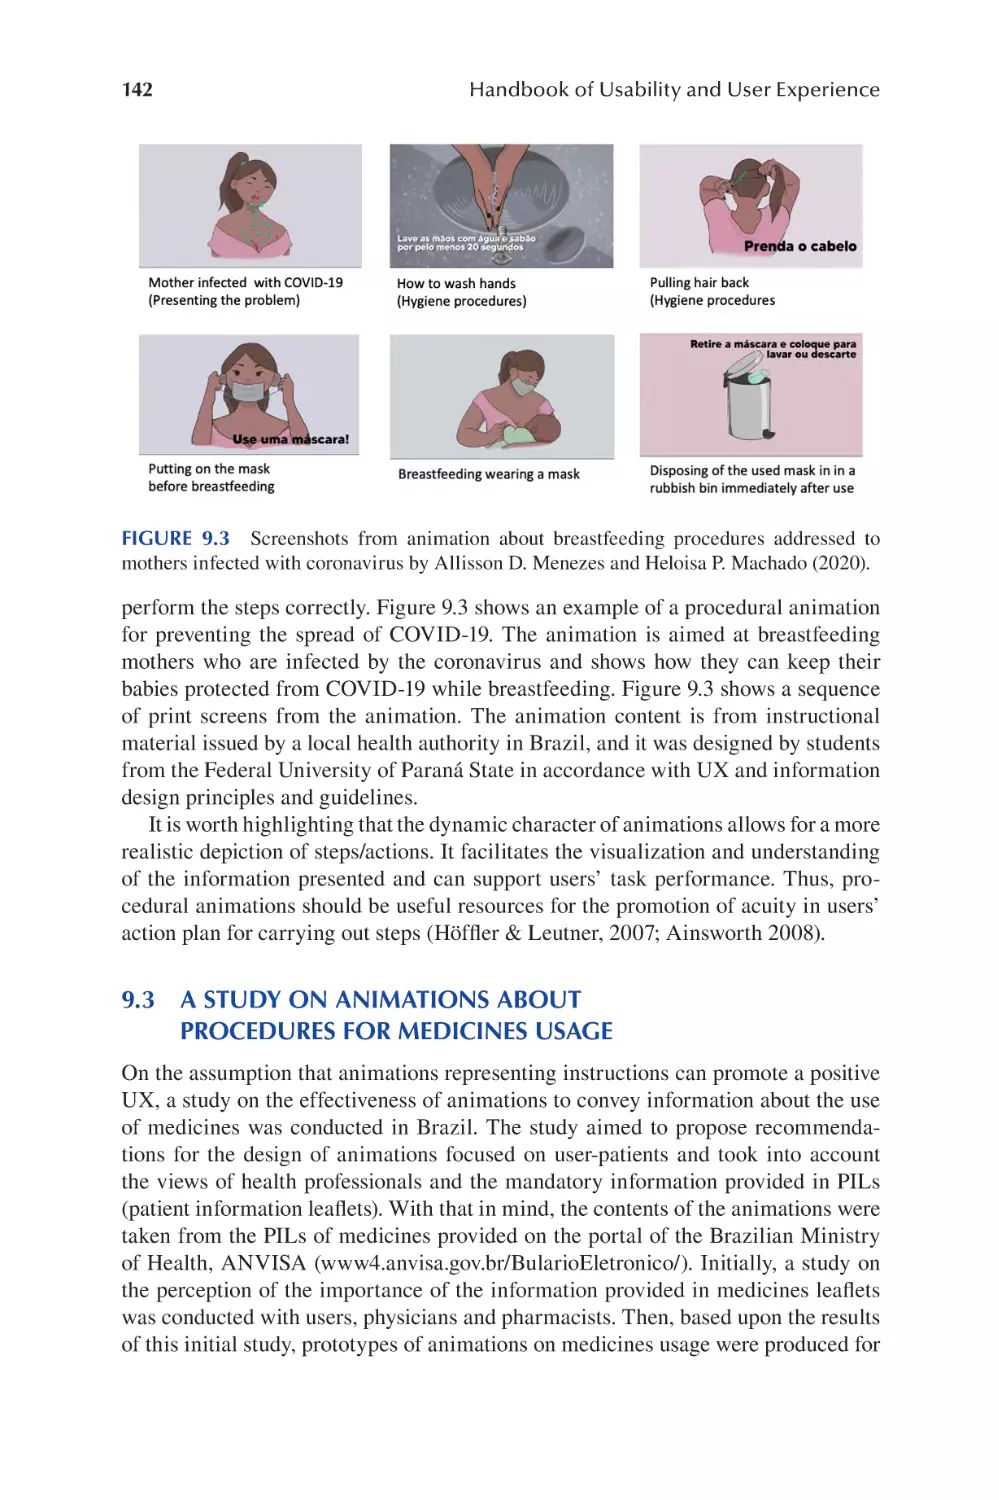 9.3 A Study on Animations about Procedures for Medicines Usage